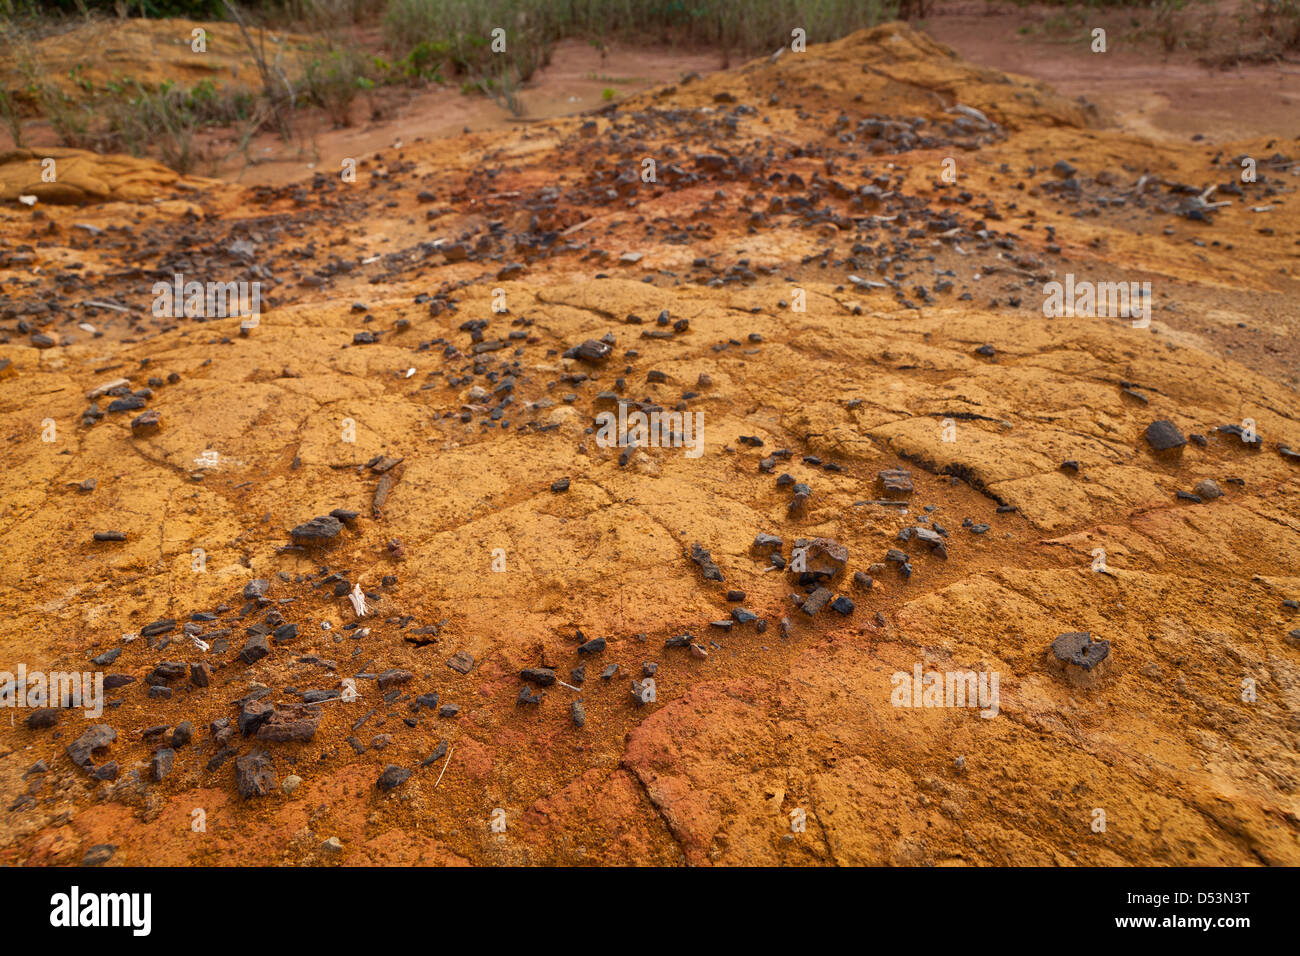 Coal on top of the soil, from ancient settlements, in Sarigua national park (desert), Herrera province, Republic of Panama. Stock Photo